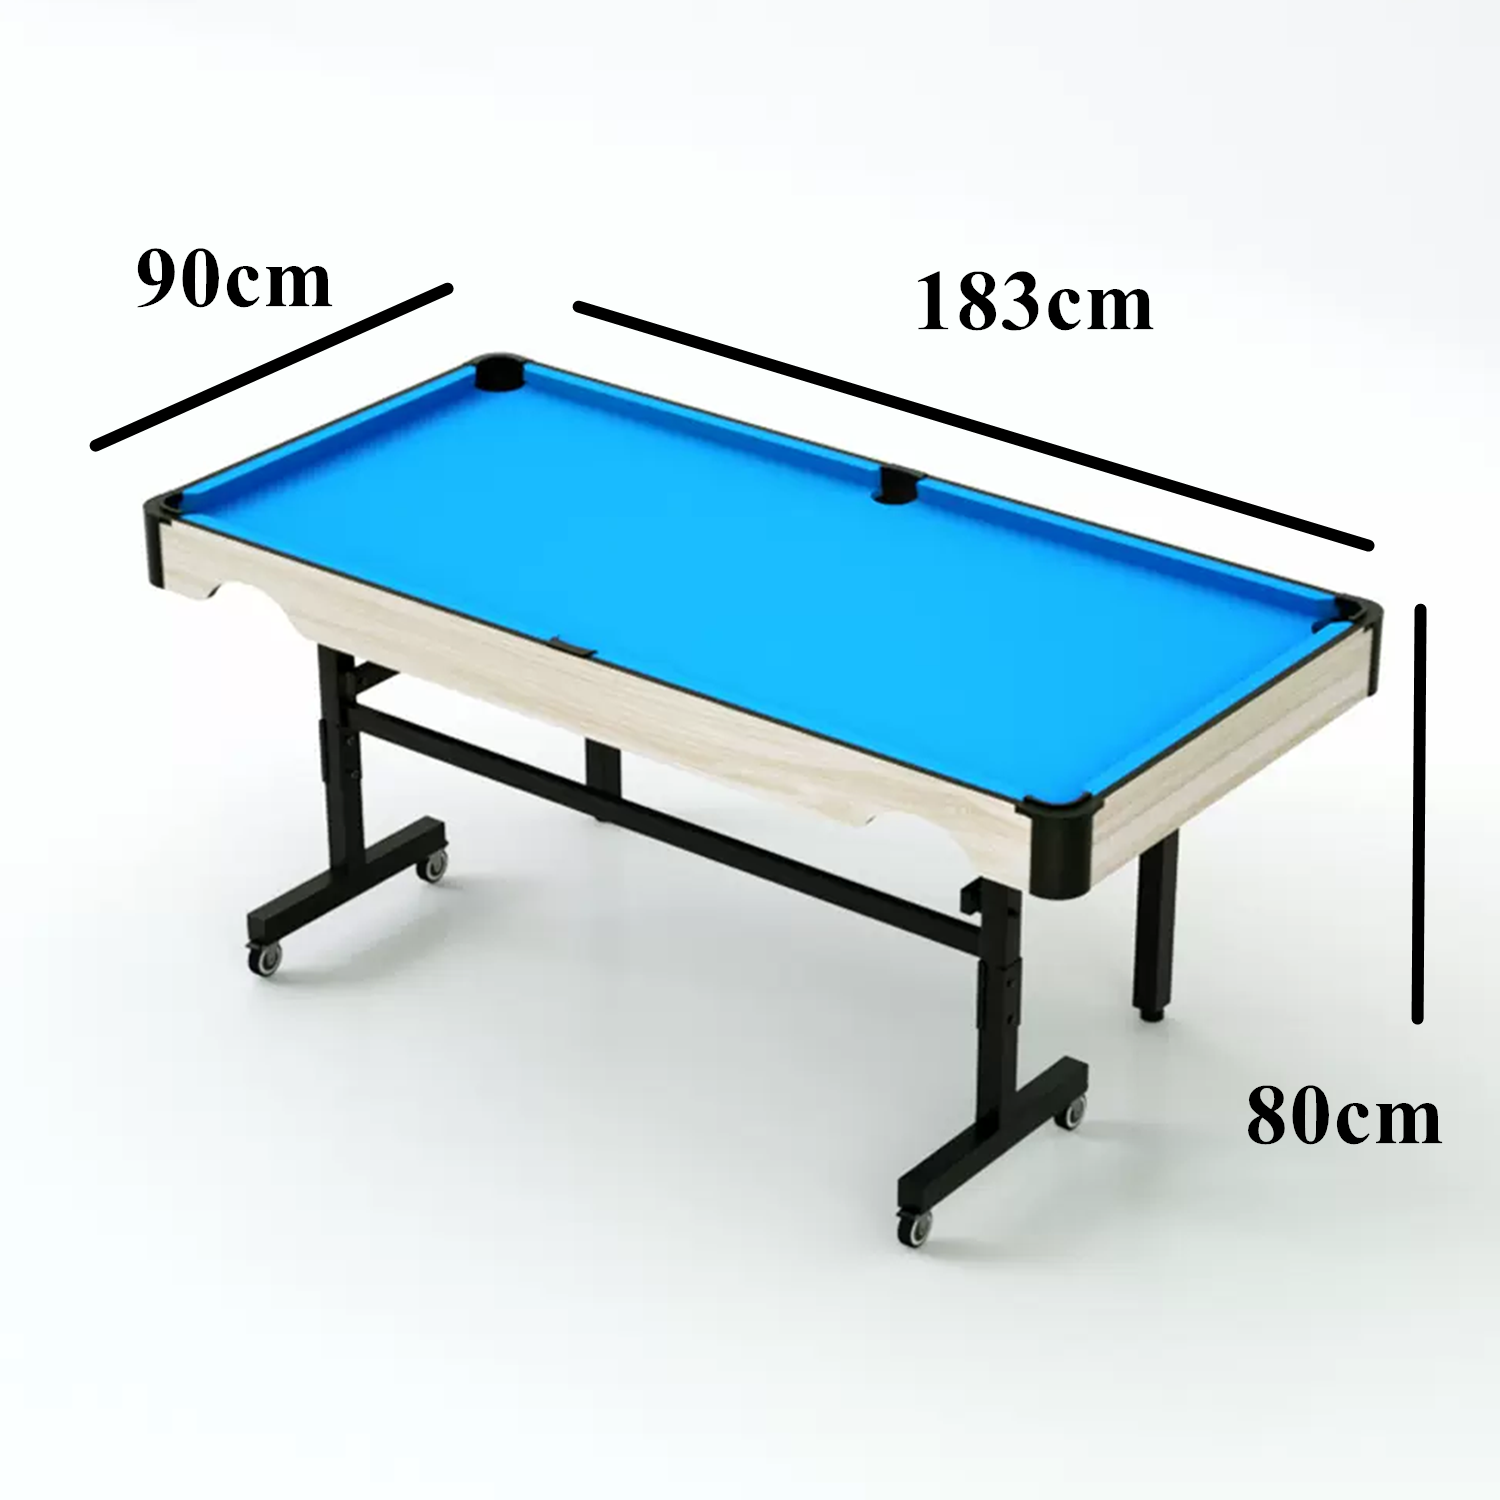 Otto Foldable Pool Table-6FT 3IN1| No Assembly Required